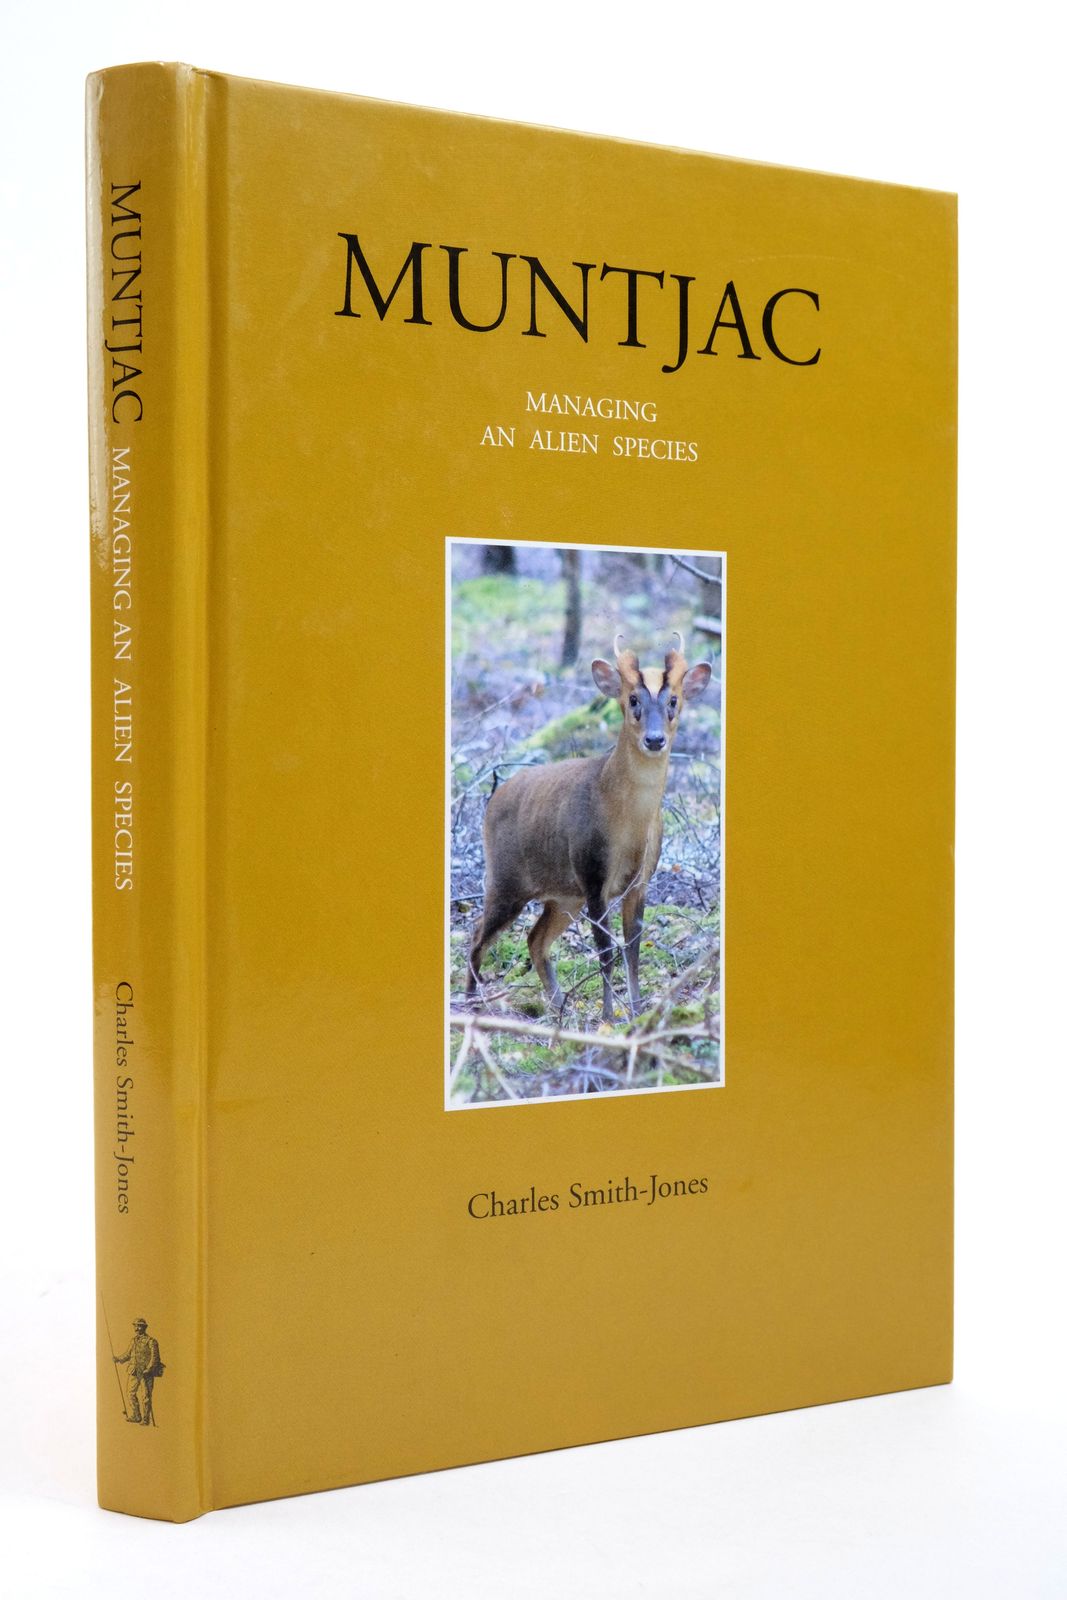 Photo of MUNTJAC: MANAGING AN ALIEN SPECIES written by Smith-Jones, Charles illustrated by Boon, Ashe published by Coch-Y-Bonddu Books (STOCK CODE: 2138821)  for sale by Stella & Rose's Books